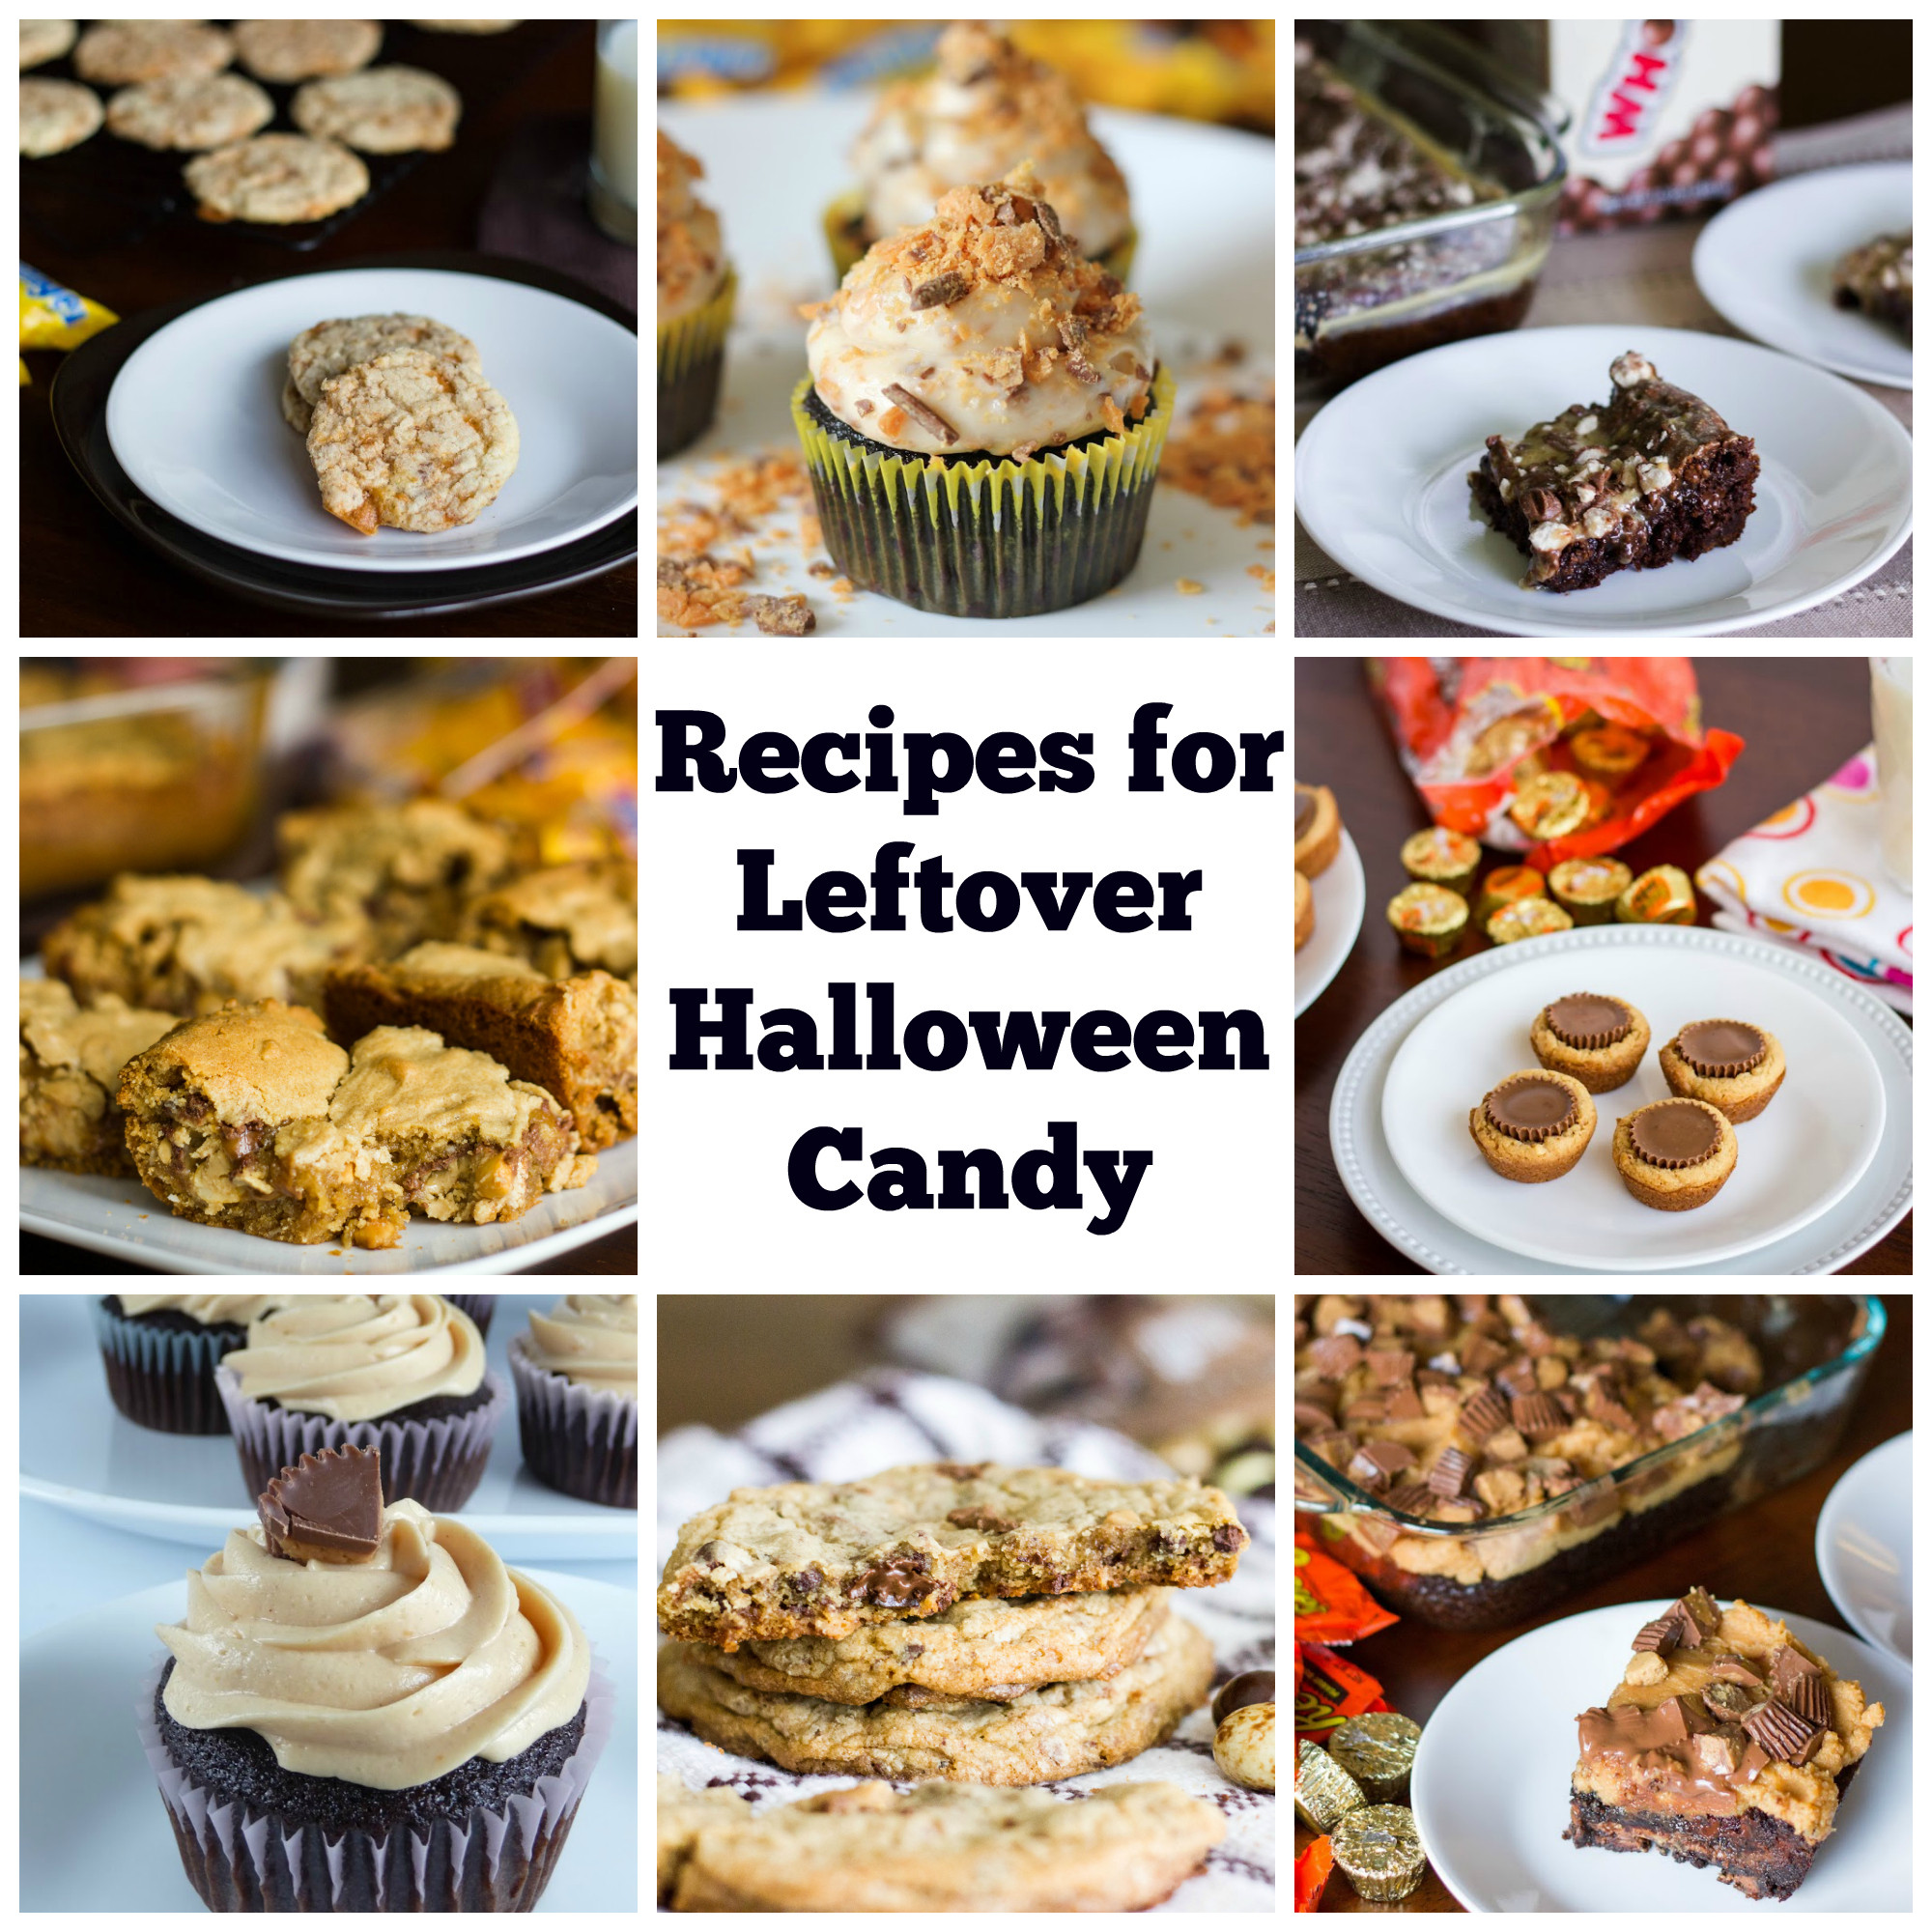 Recipes For Leftover Halloween Candy
 Recipes for Leftover Halloween Candy Kendra s Treats